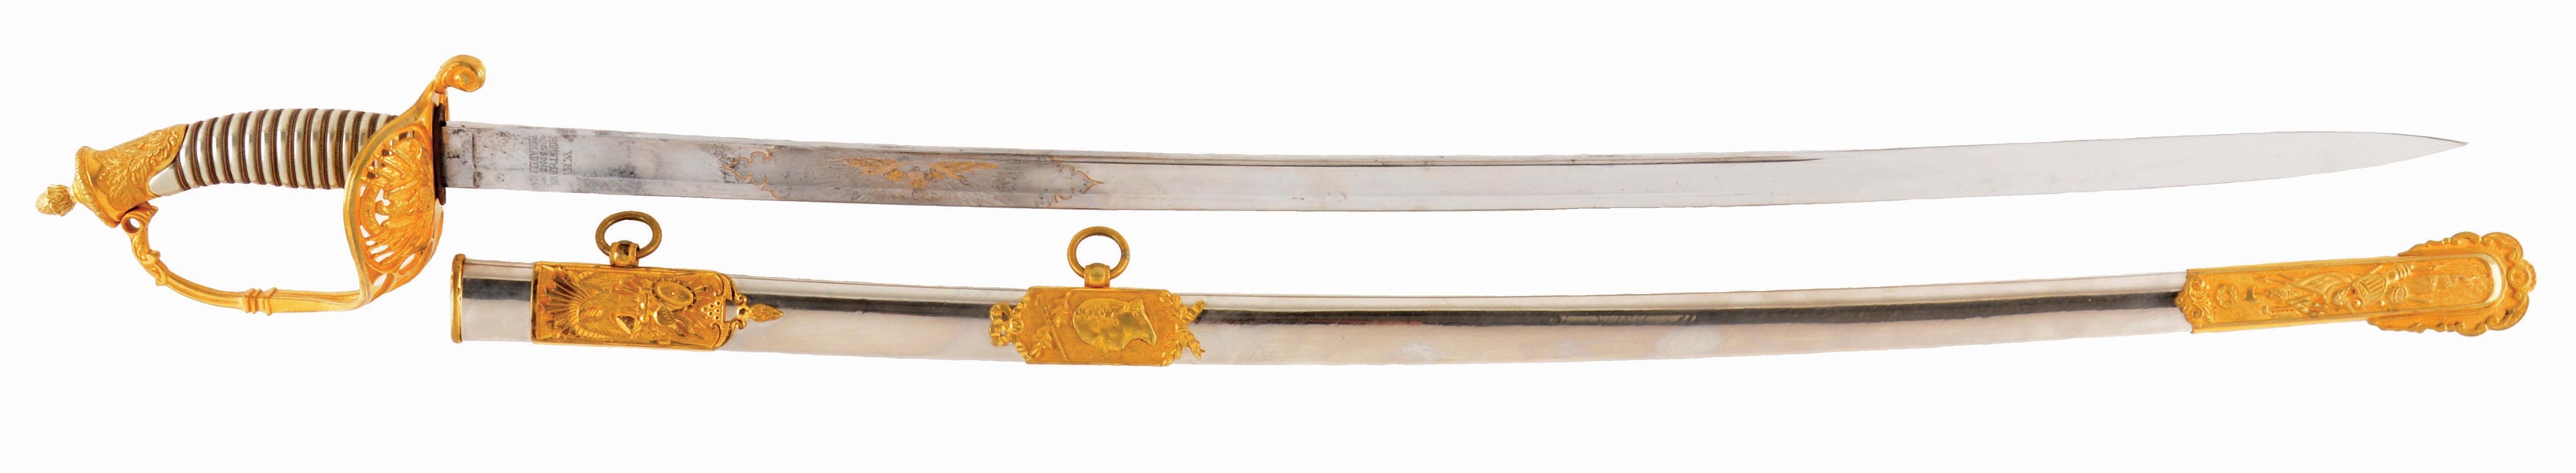 AN EXTREMELY HISTORIC AND RARE WASHINGTON PATTERN SILVER GRIPPED PRESENTATION SWORD BY HORSTMANN AND SONS AND PRESENTED TO THE INTREPID MAJOR ALEXANDER MCCUEN, A HERO OF GETTYSBURG.